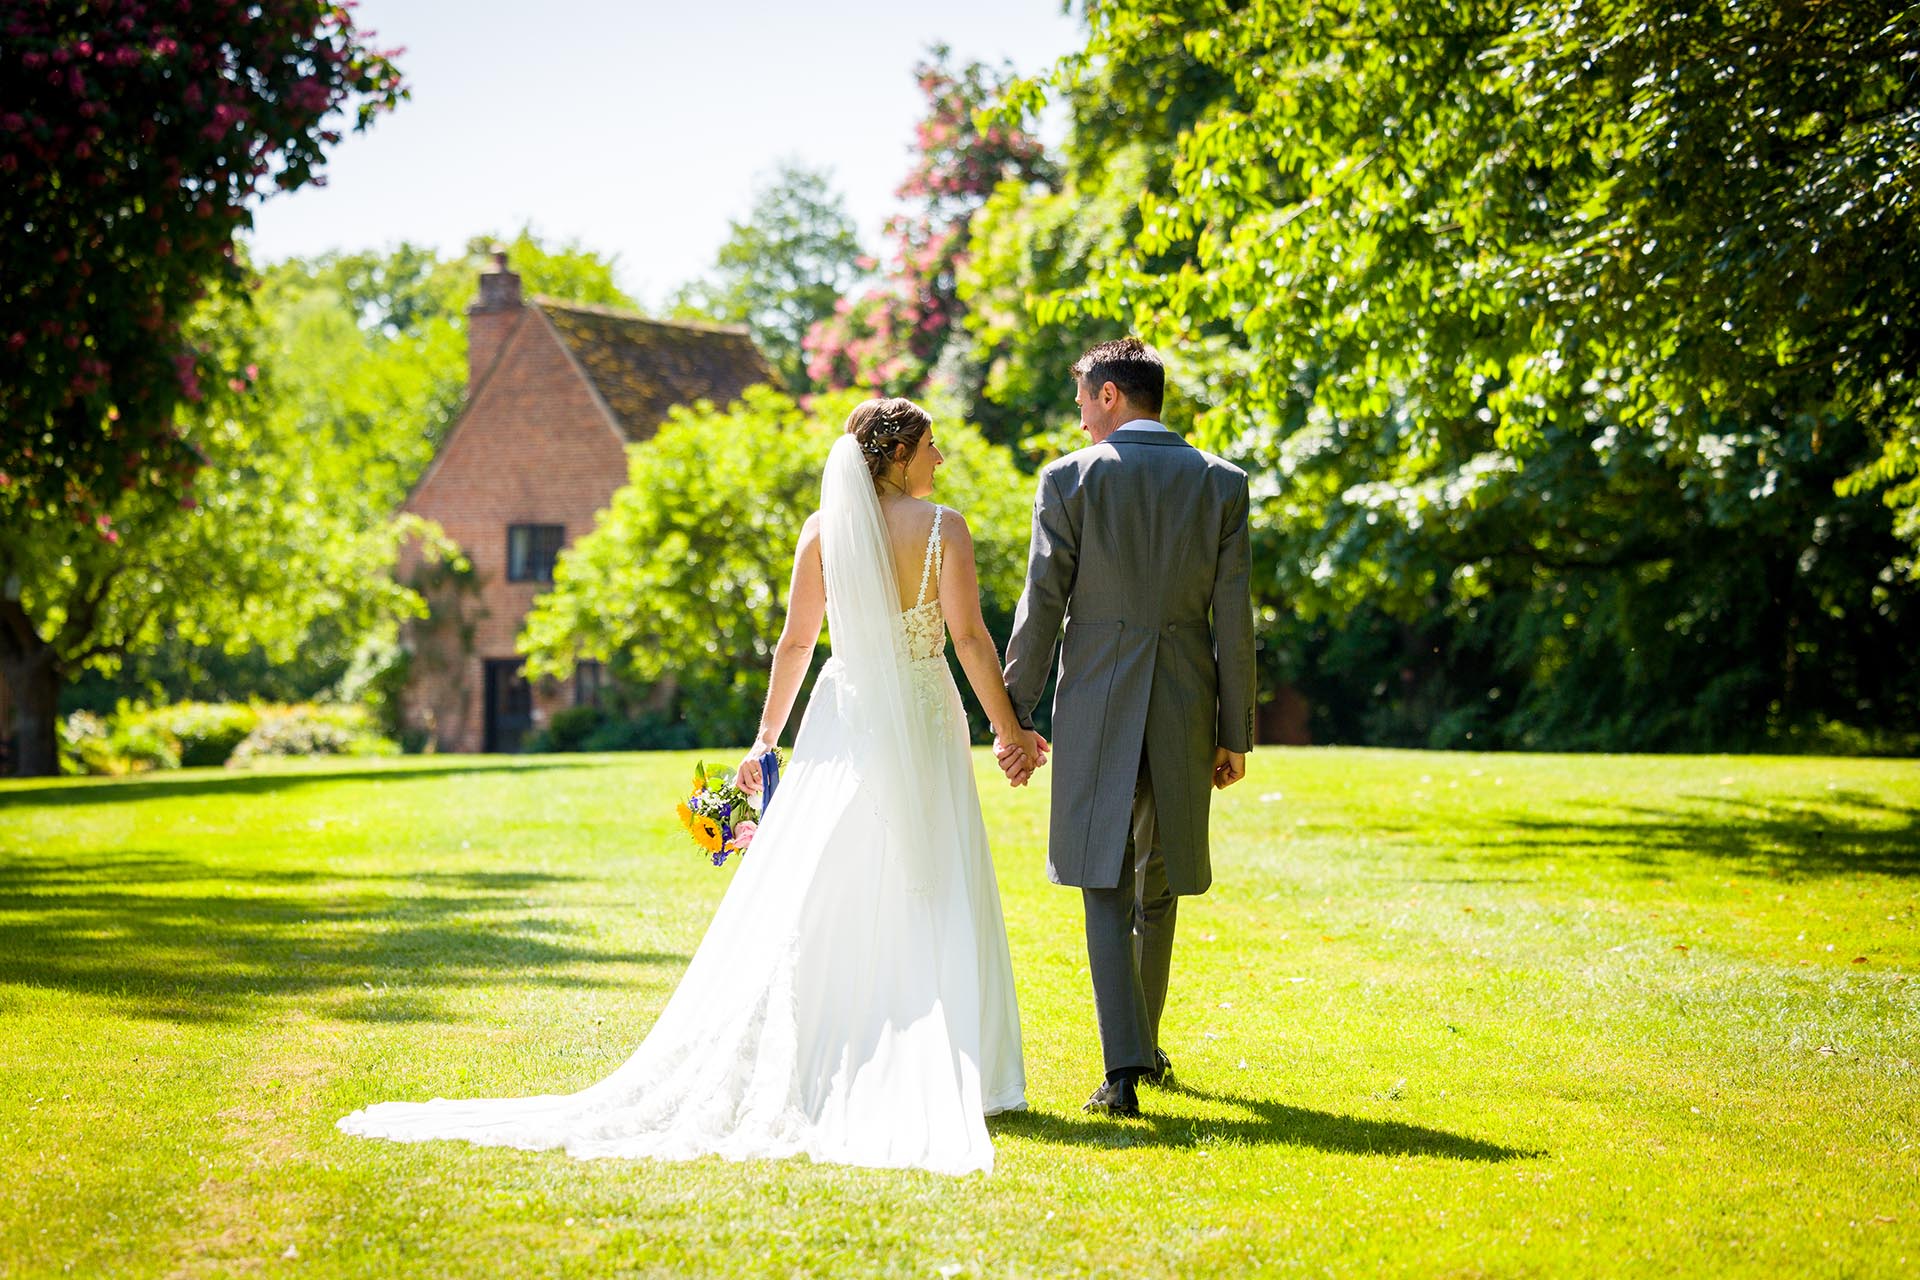 Bride and groom walking through the grounds during a summer wedding at Leez Priory, Great Leighs, Chelmsford, by Essex wedding photographer